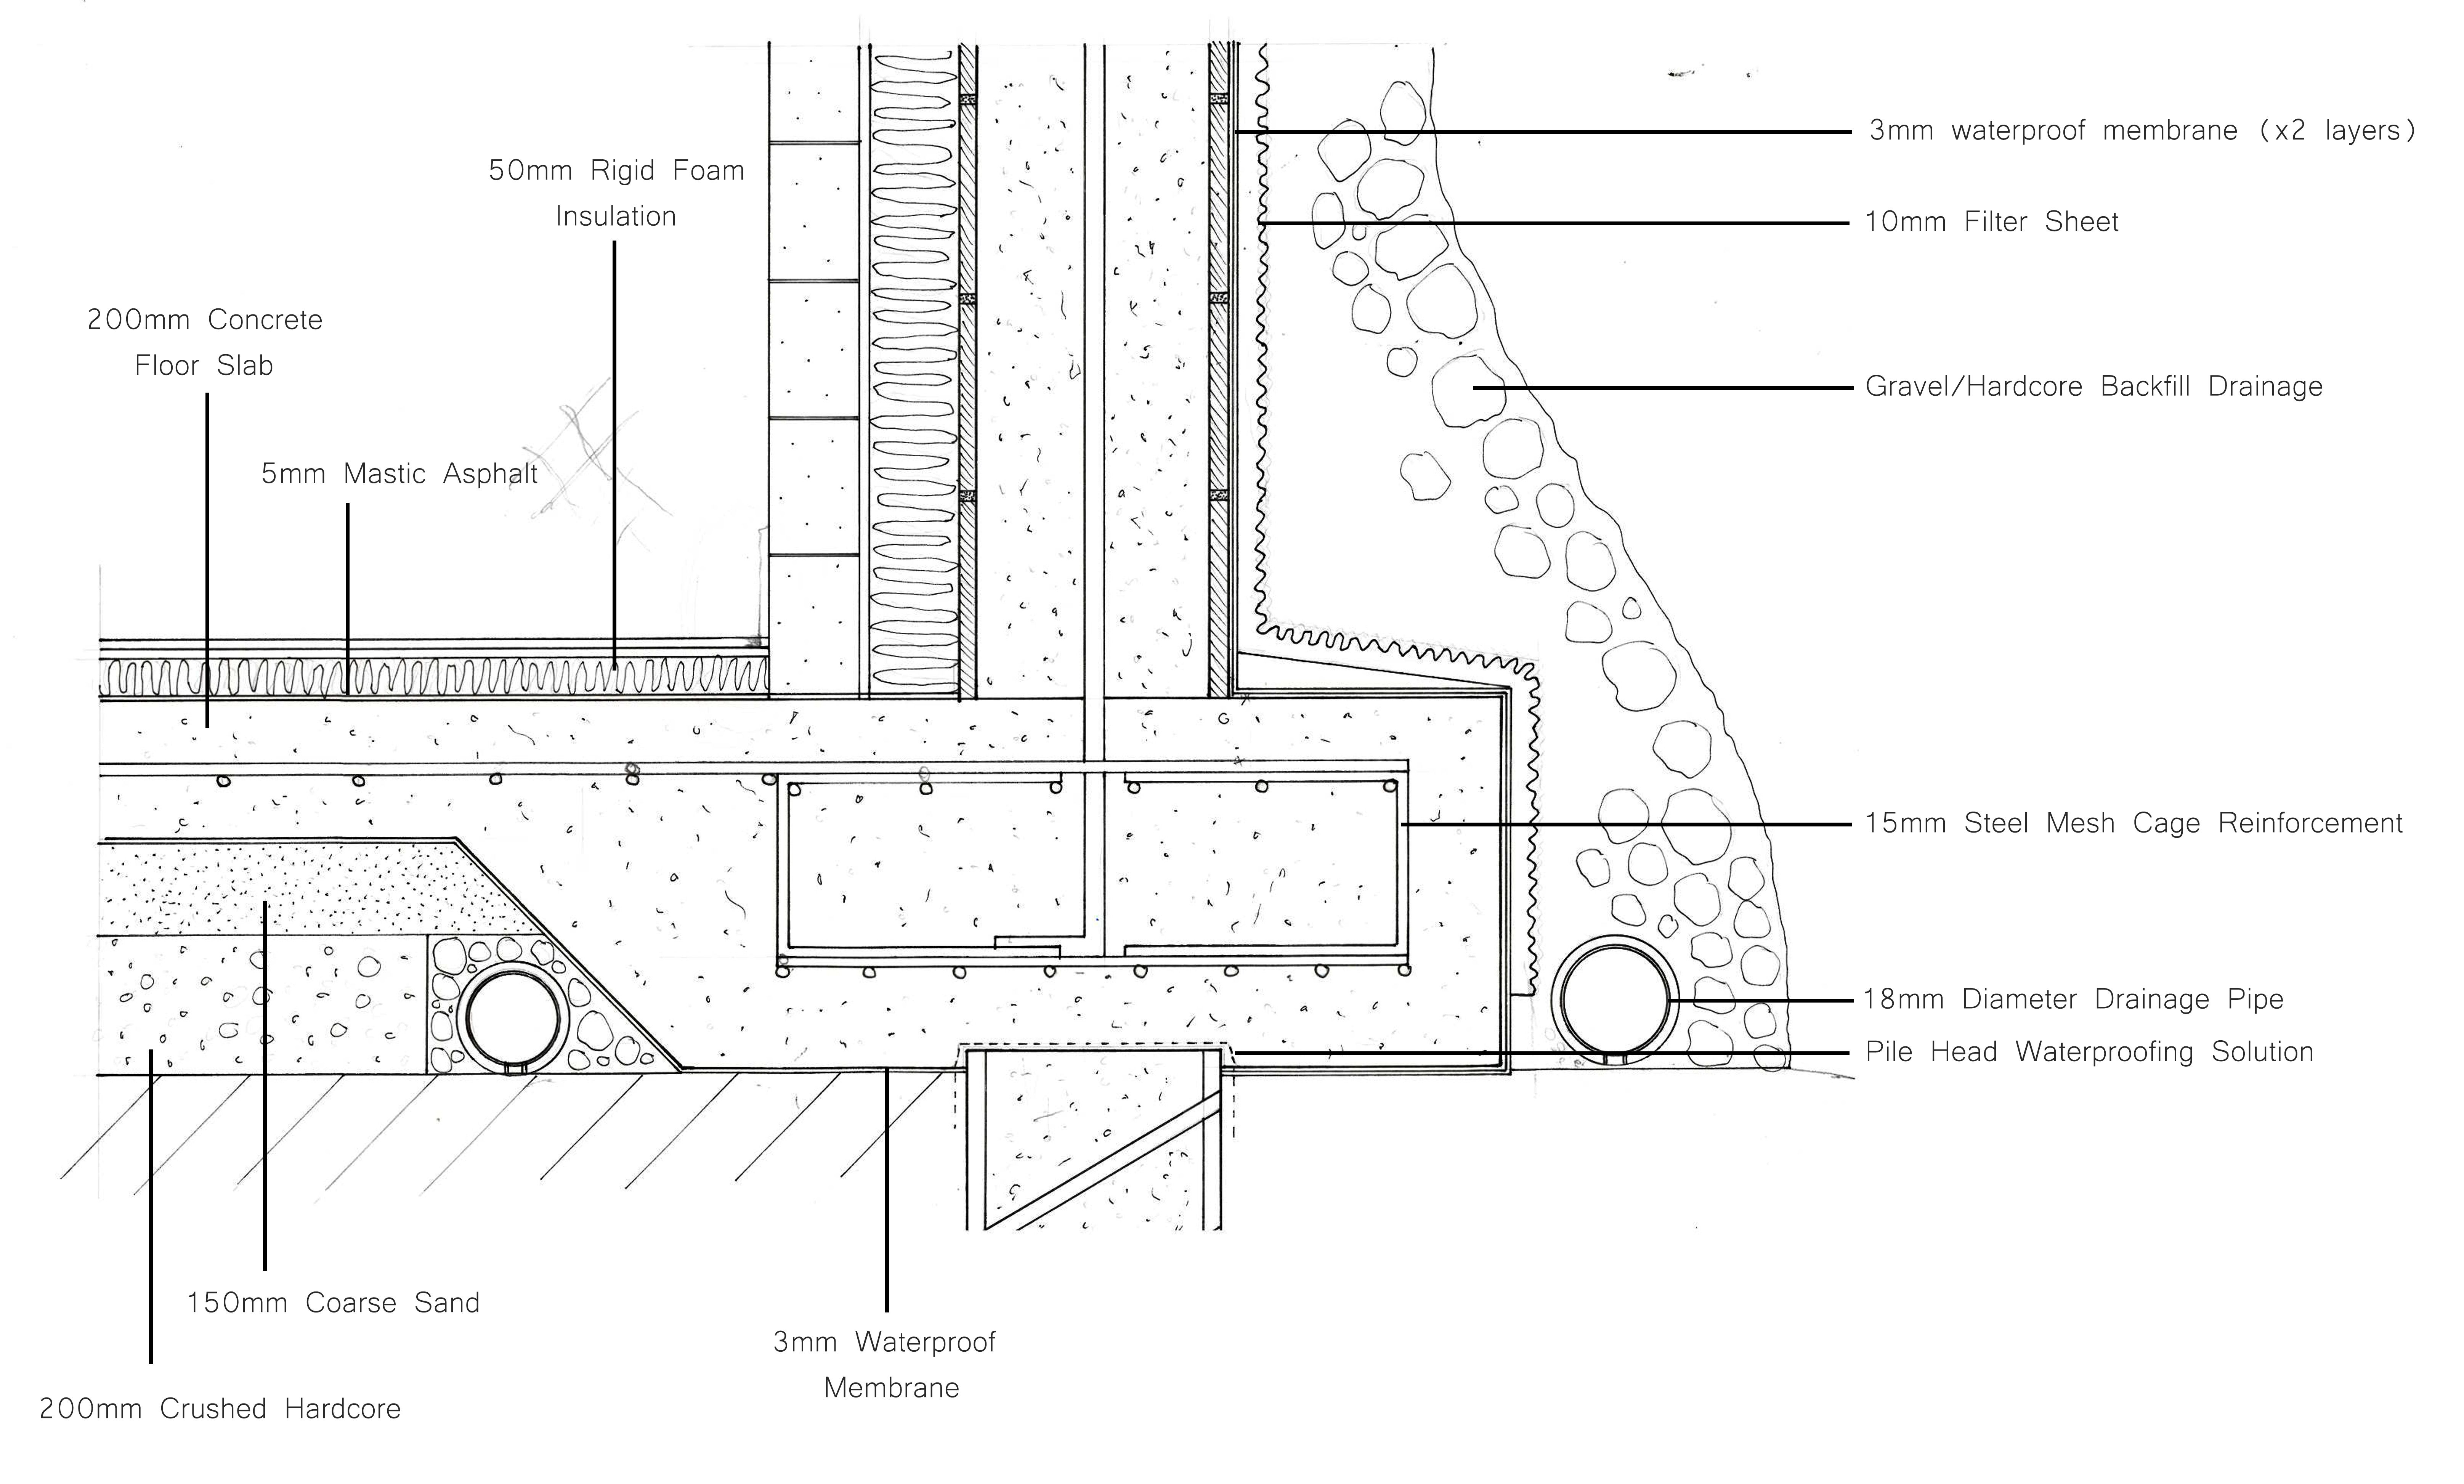 15 Best New Section Raft Foundation Detail Drawing Sarah Sidney Blogs